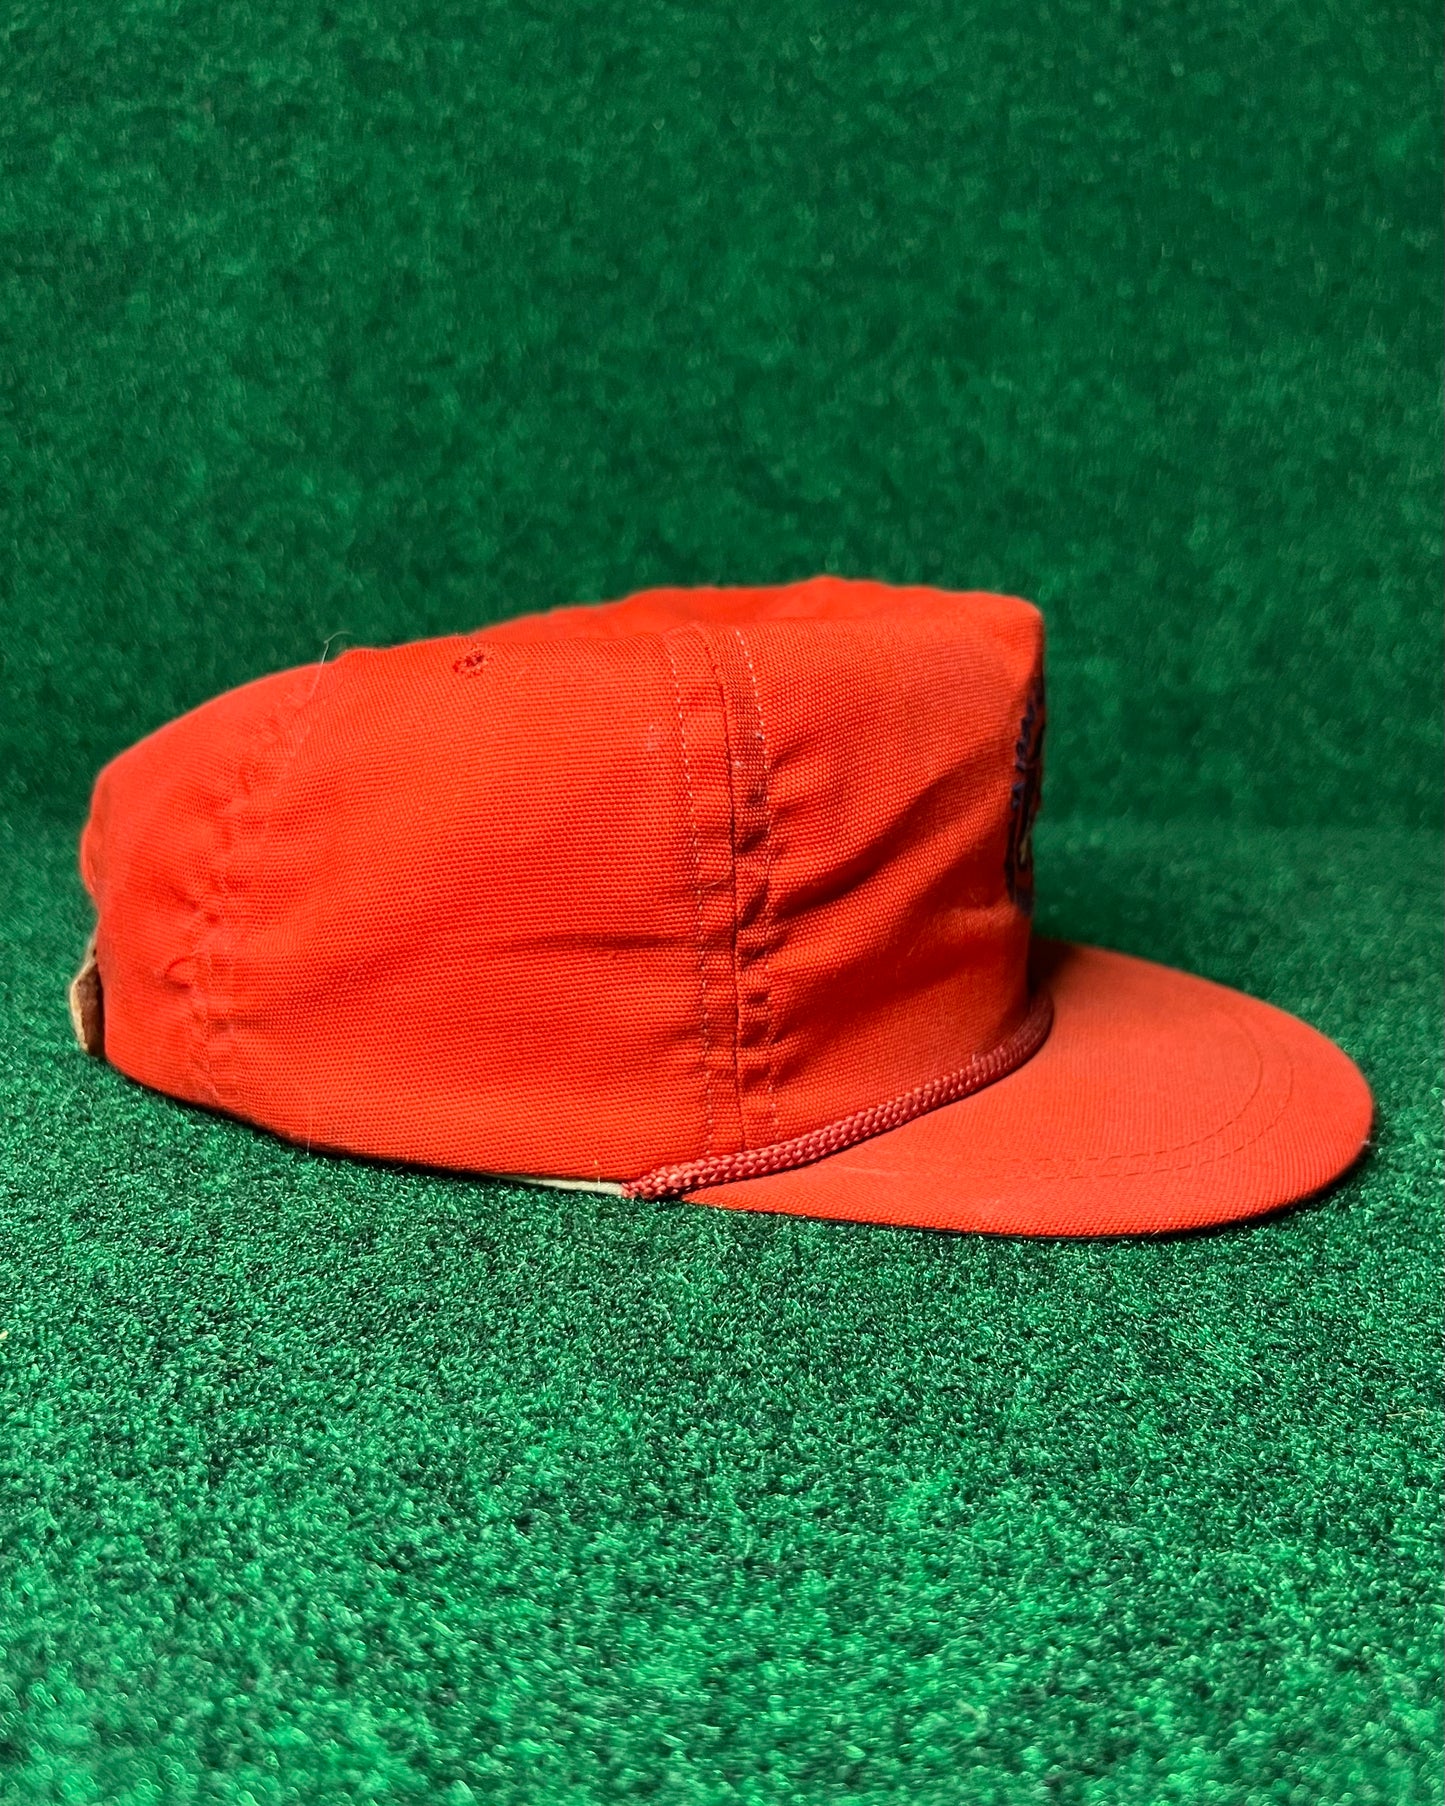 1984 US Open Winged Foot Golf Club Hat